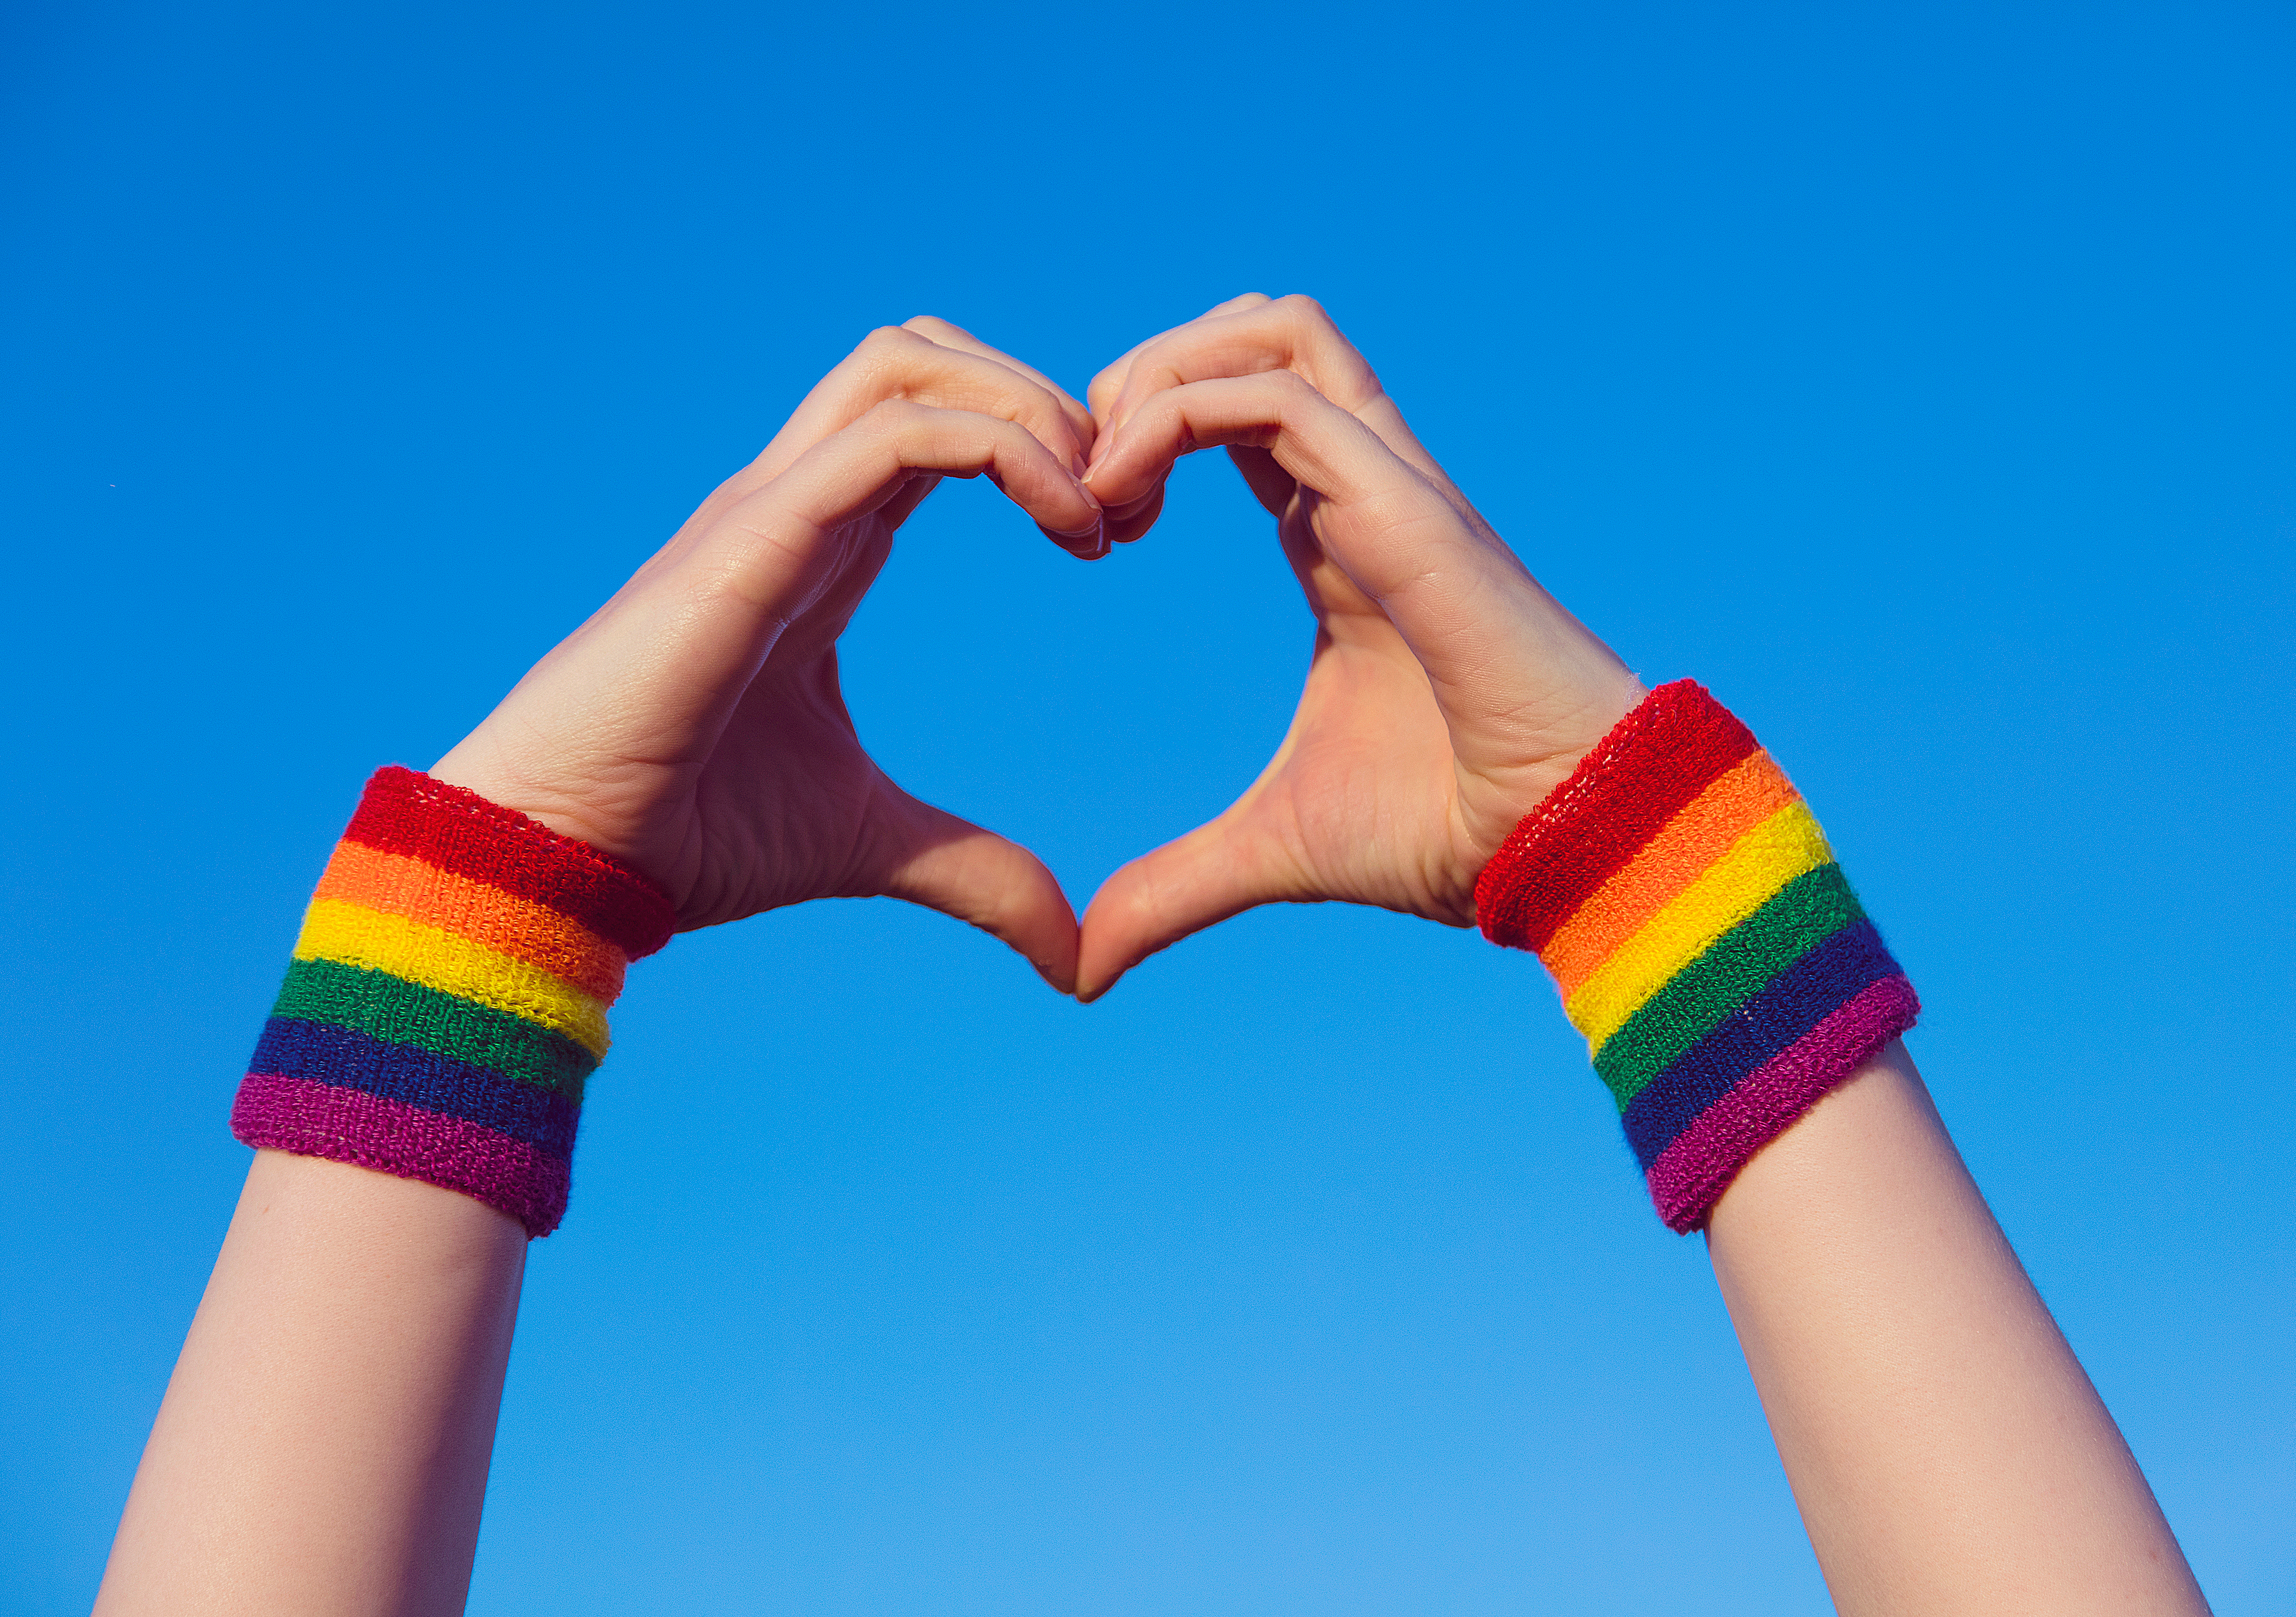 Is Your Recruitment Process and Workplace LGBTQ Inclusive?